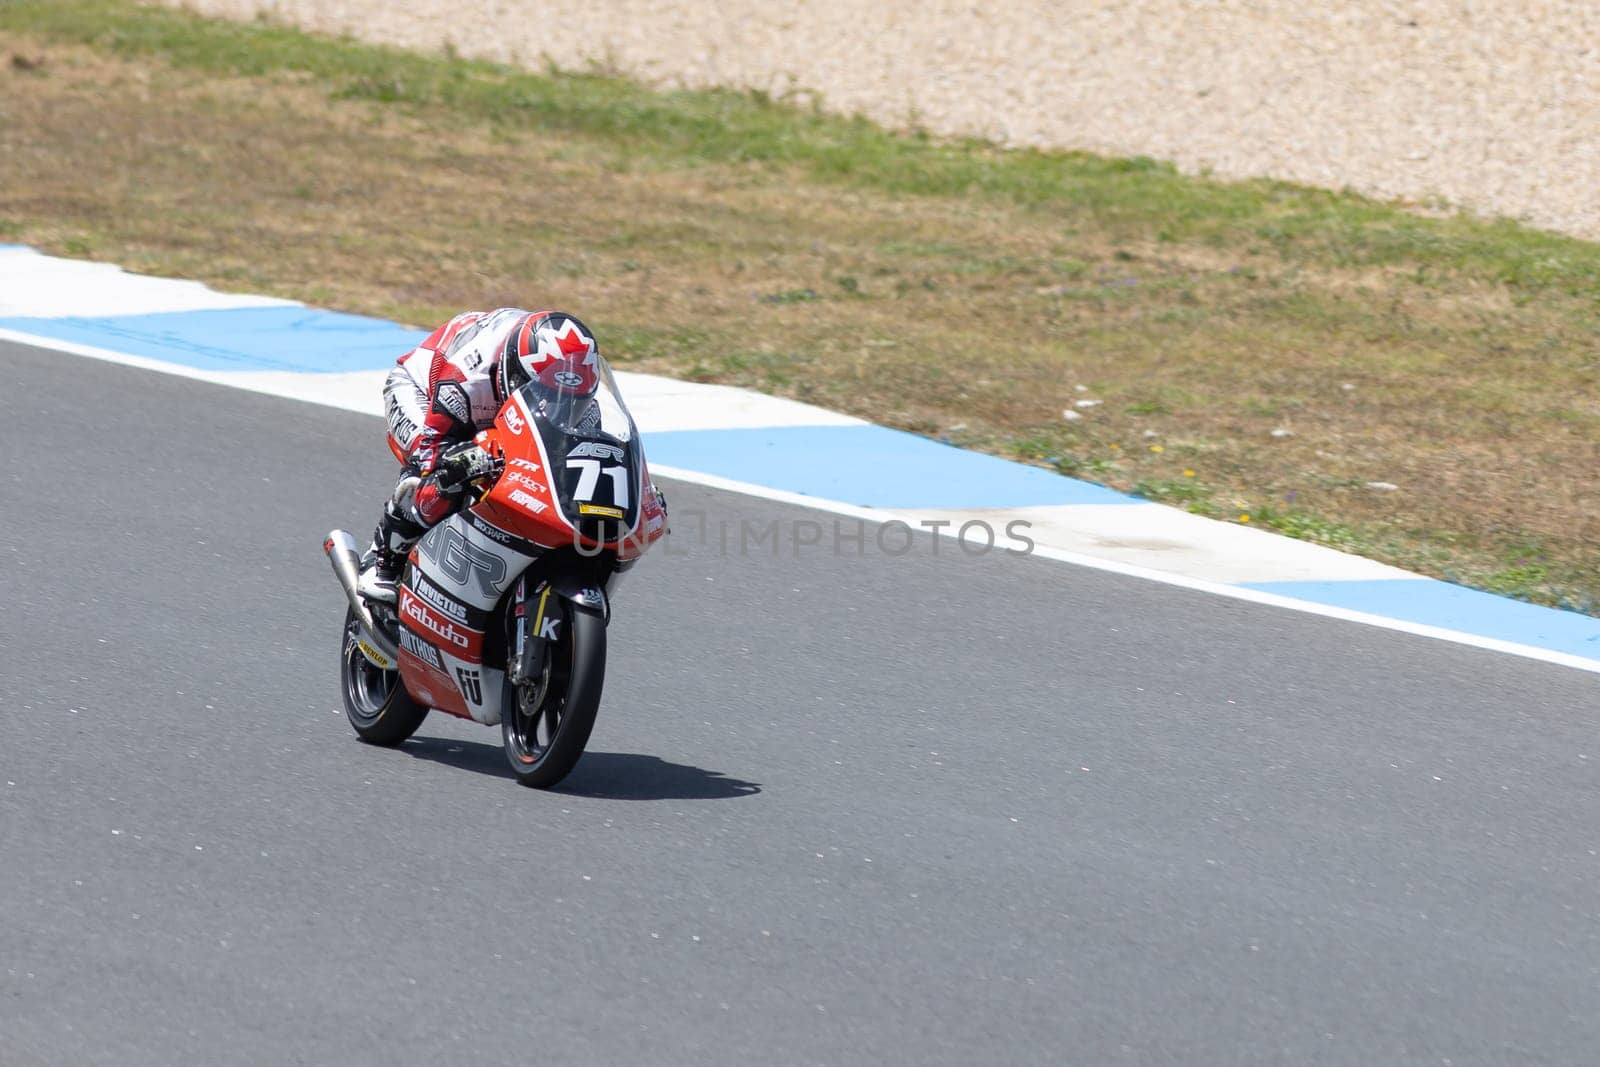 6 may 2023, Estoril, Portugal - MotoGP racing - A person riding a motorcycle on a race track